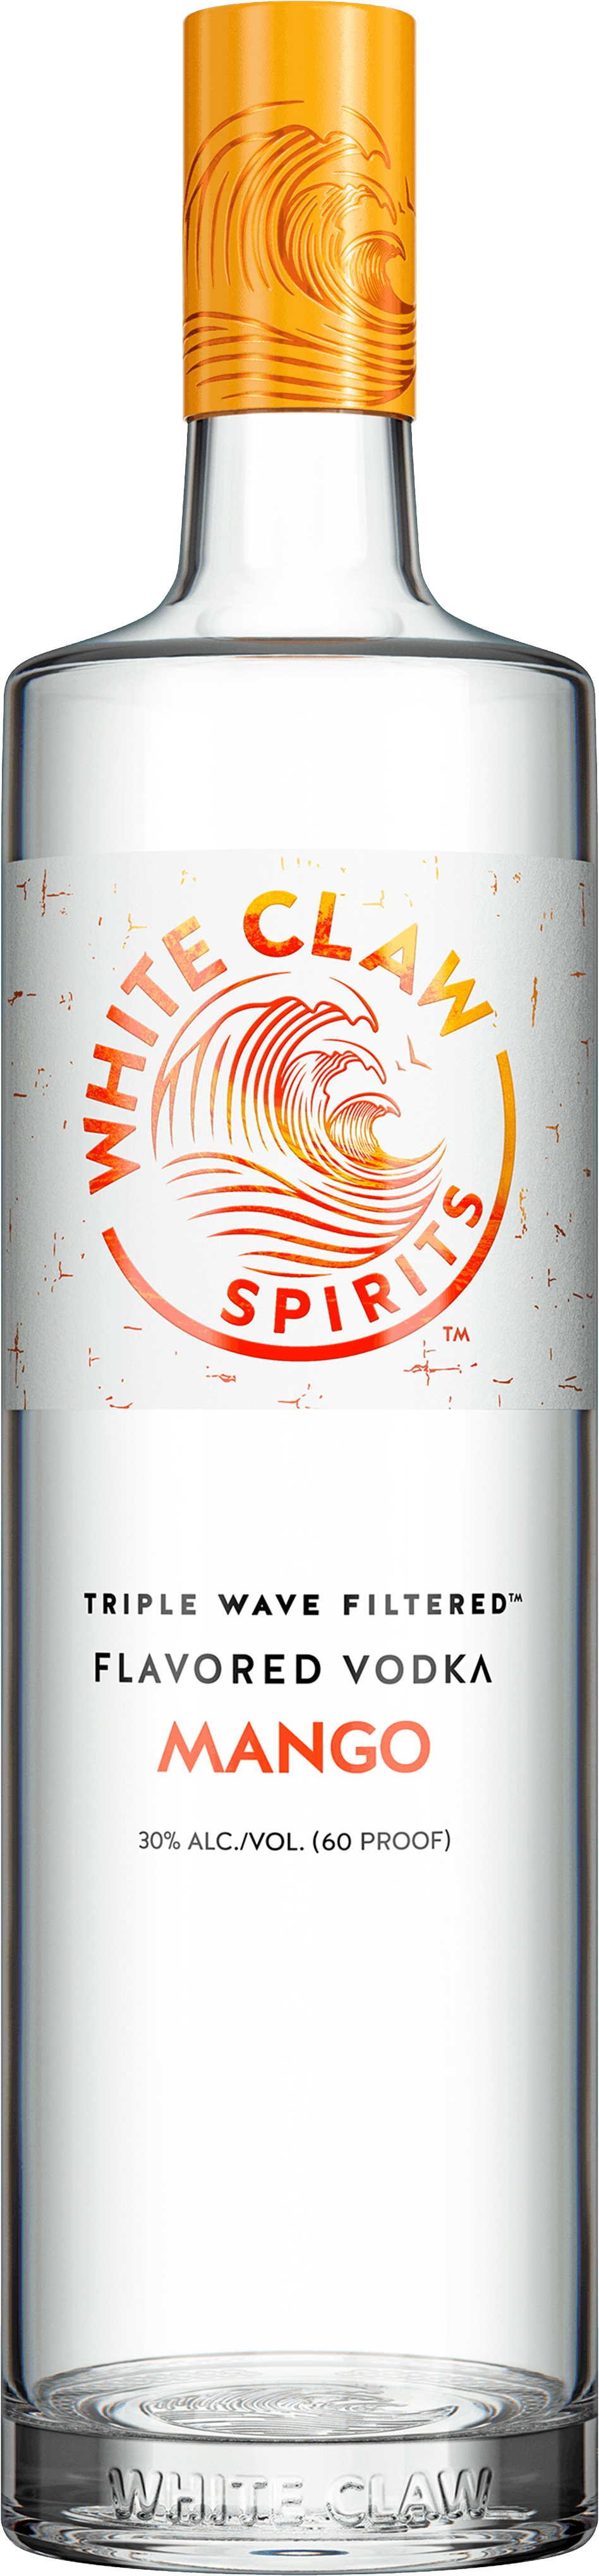 White Claw™ Flavored Vodka Mango. The bottle is over an image of a crashing wave.		